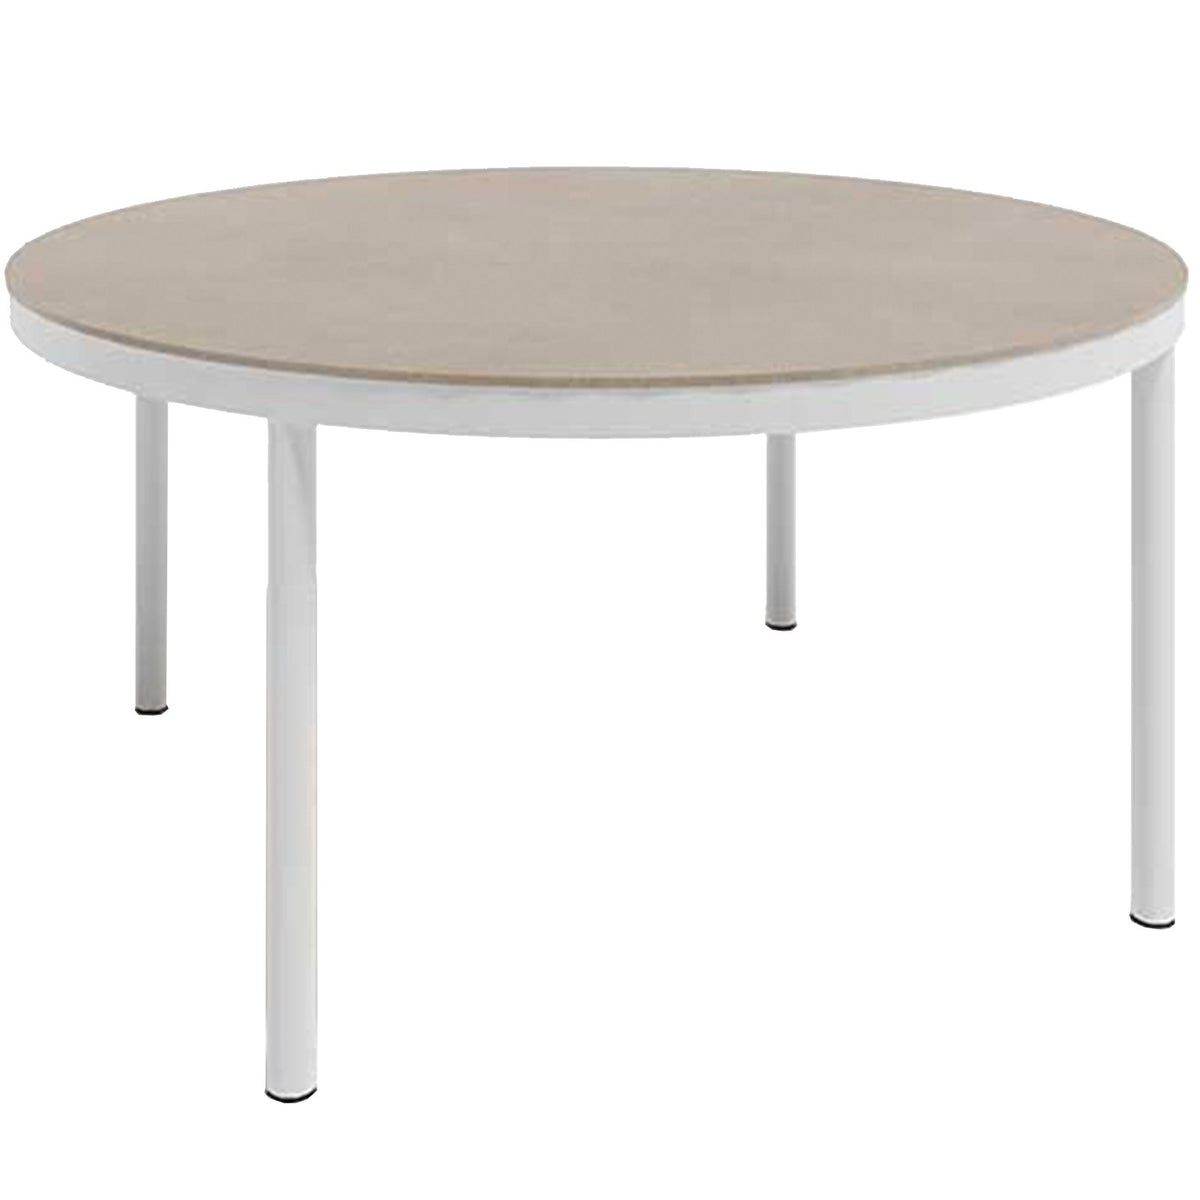 Dulton Outdoor Round Dining Table, 150